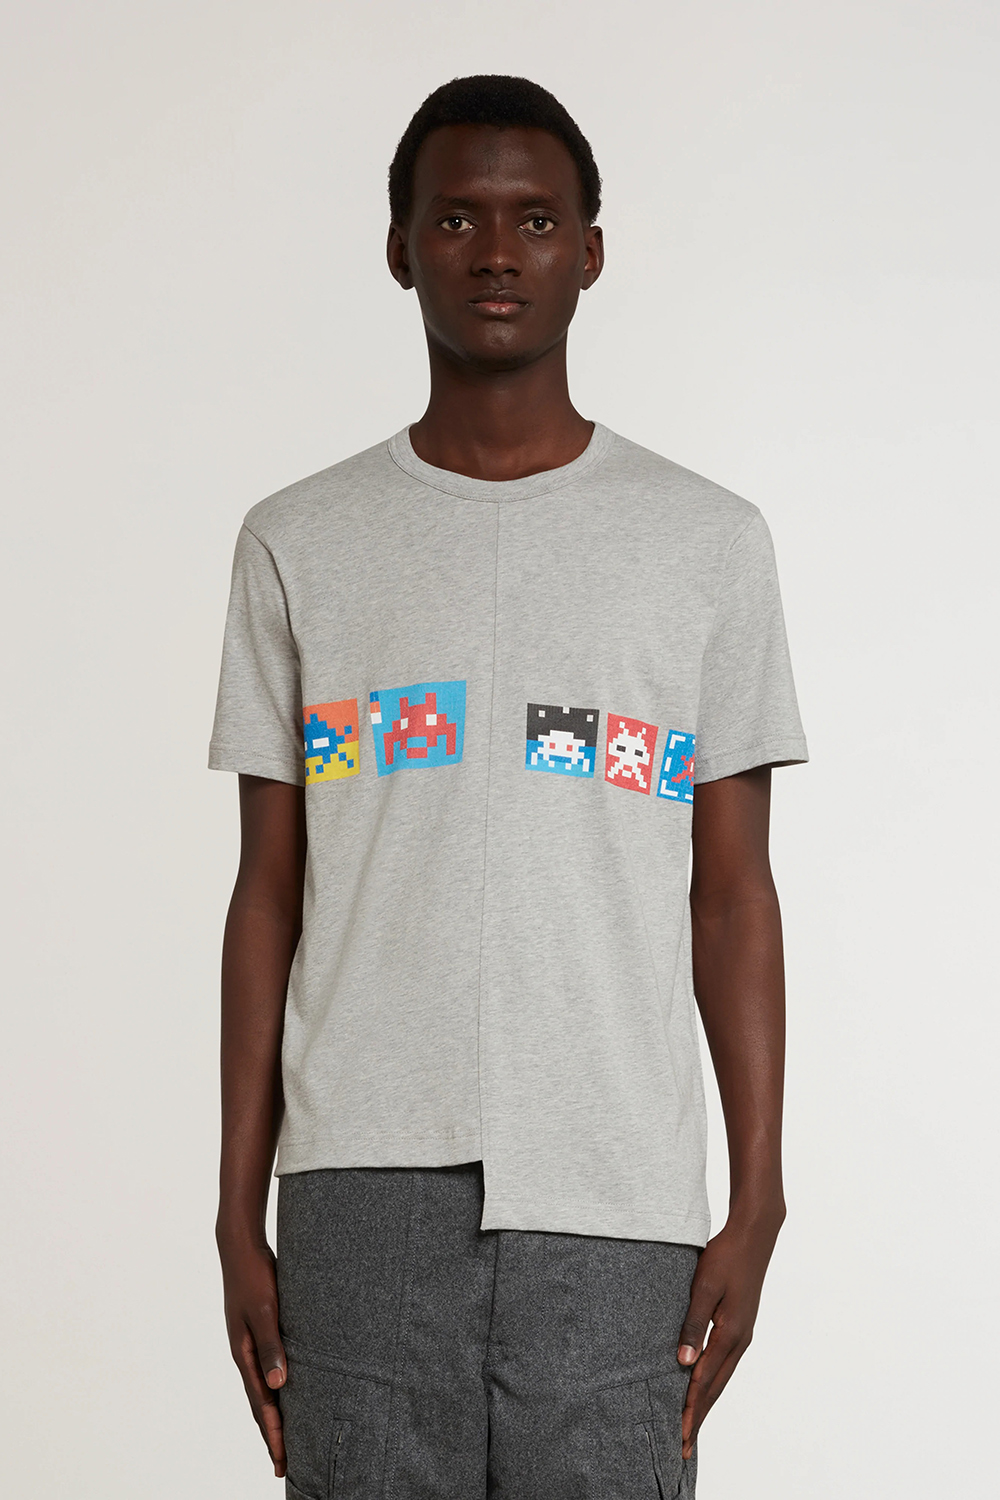 COMME des GARÇONS SHIRT Has Been Invaded By Invader